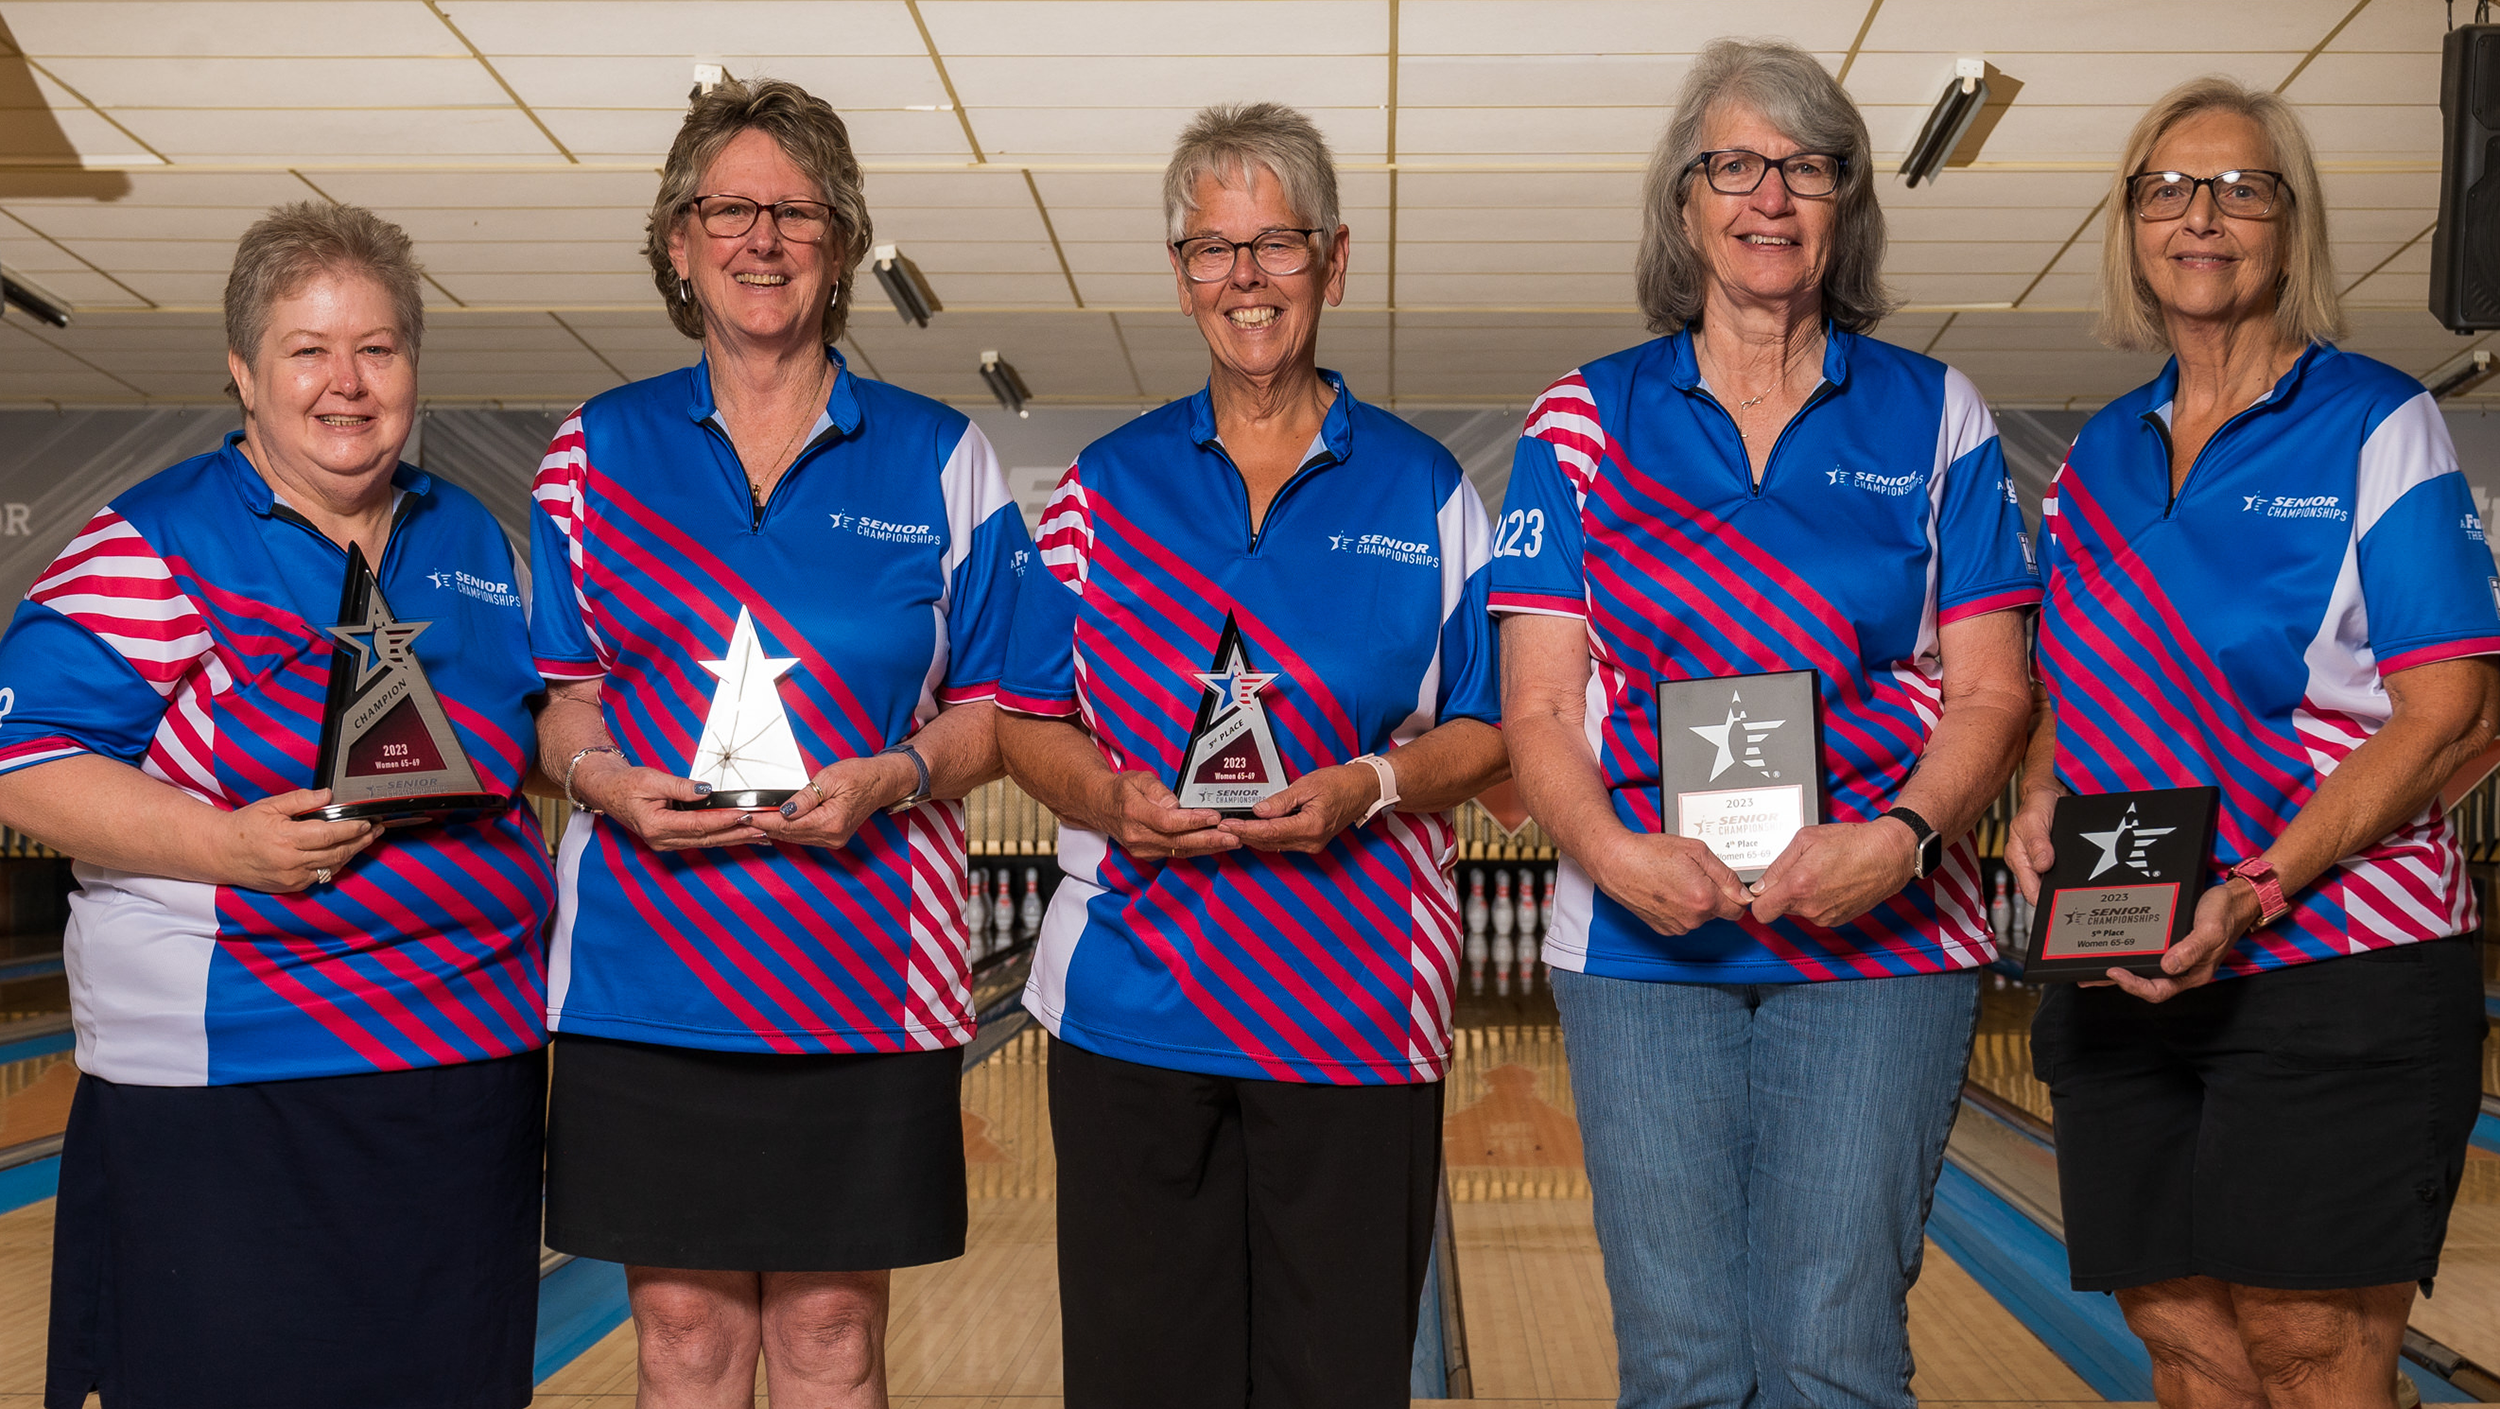 The top six finishers in Women's 65-69 at the 2023 USBC Senior Championships.